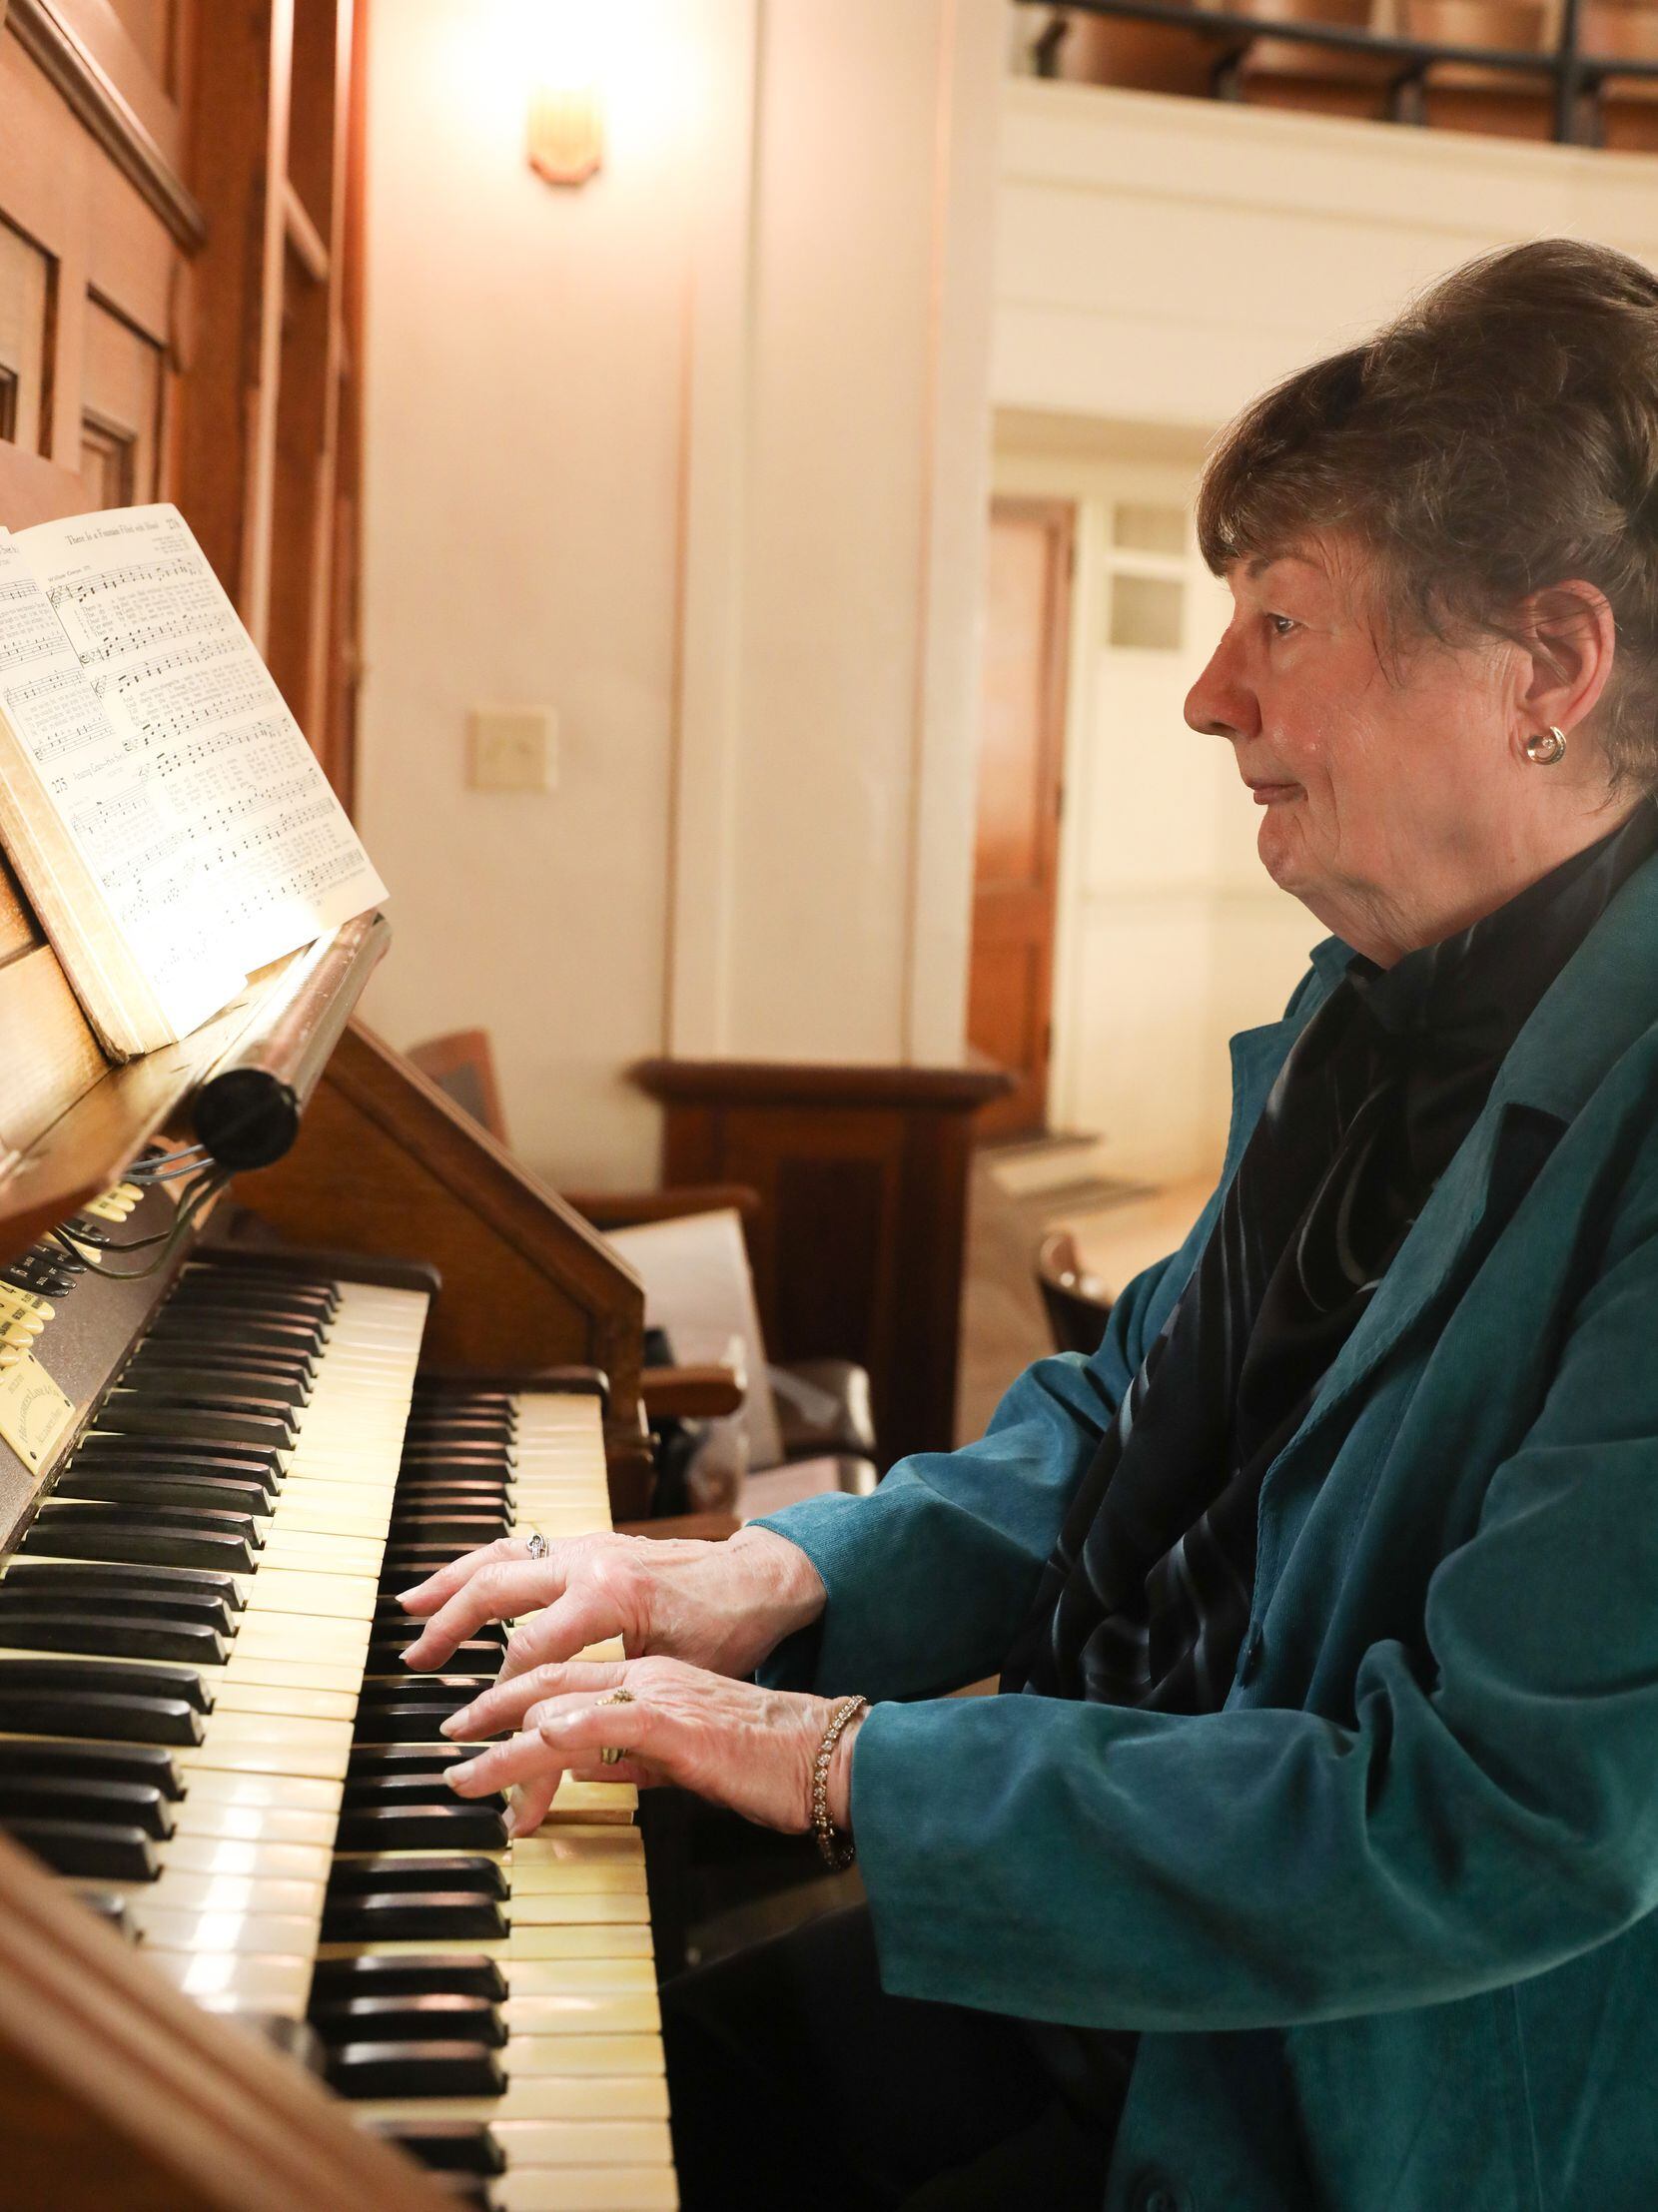 Marcia Cheatham played a small portion of "Amazing Grace," her favorite hymn to perform on...